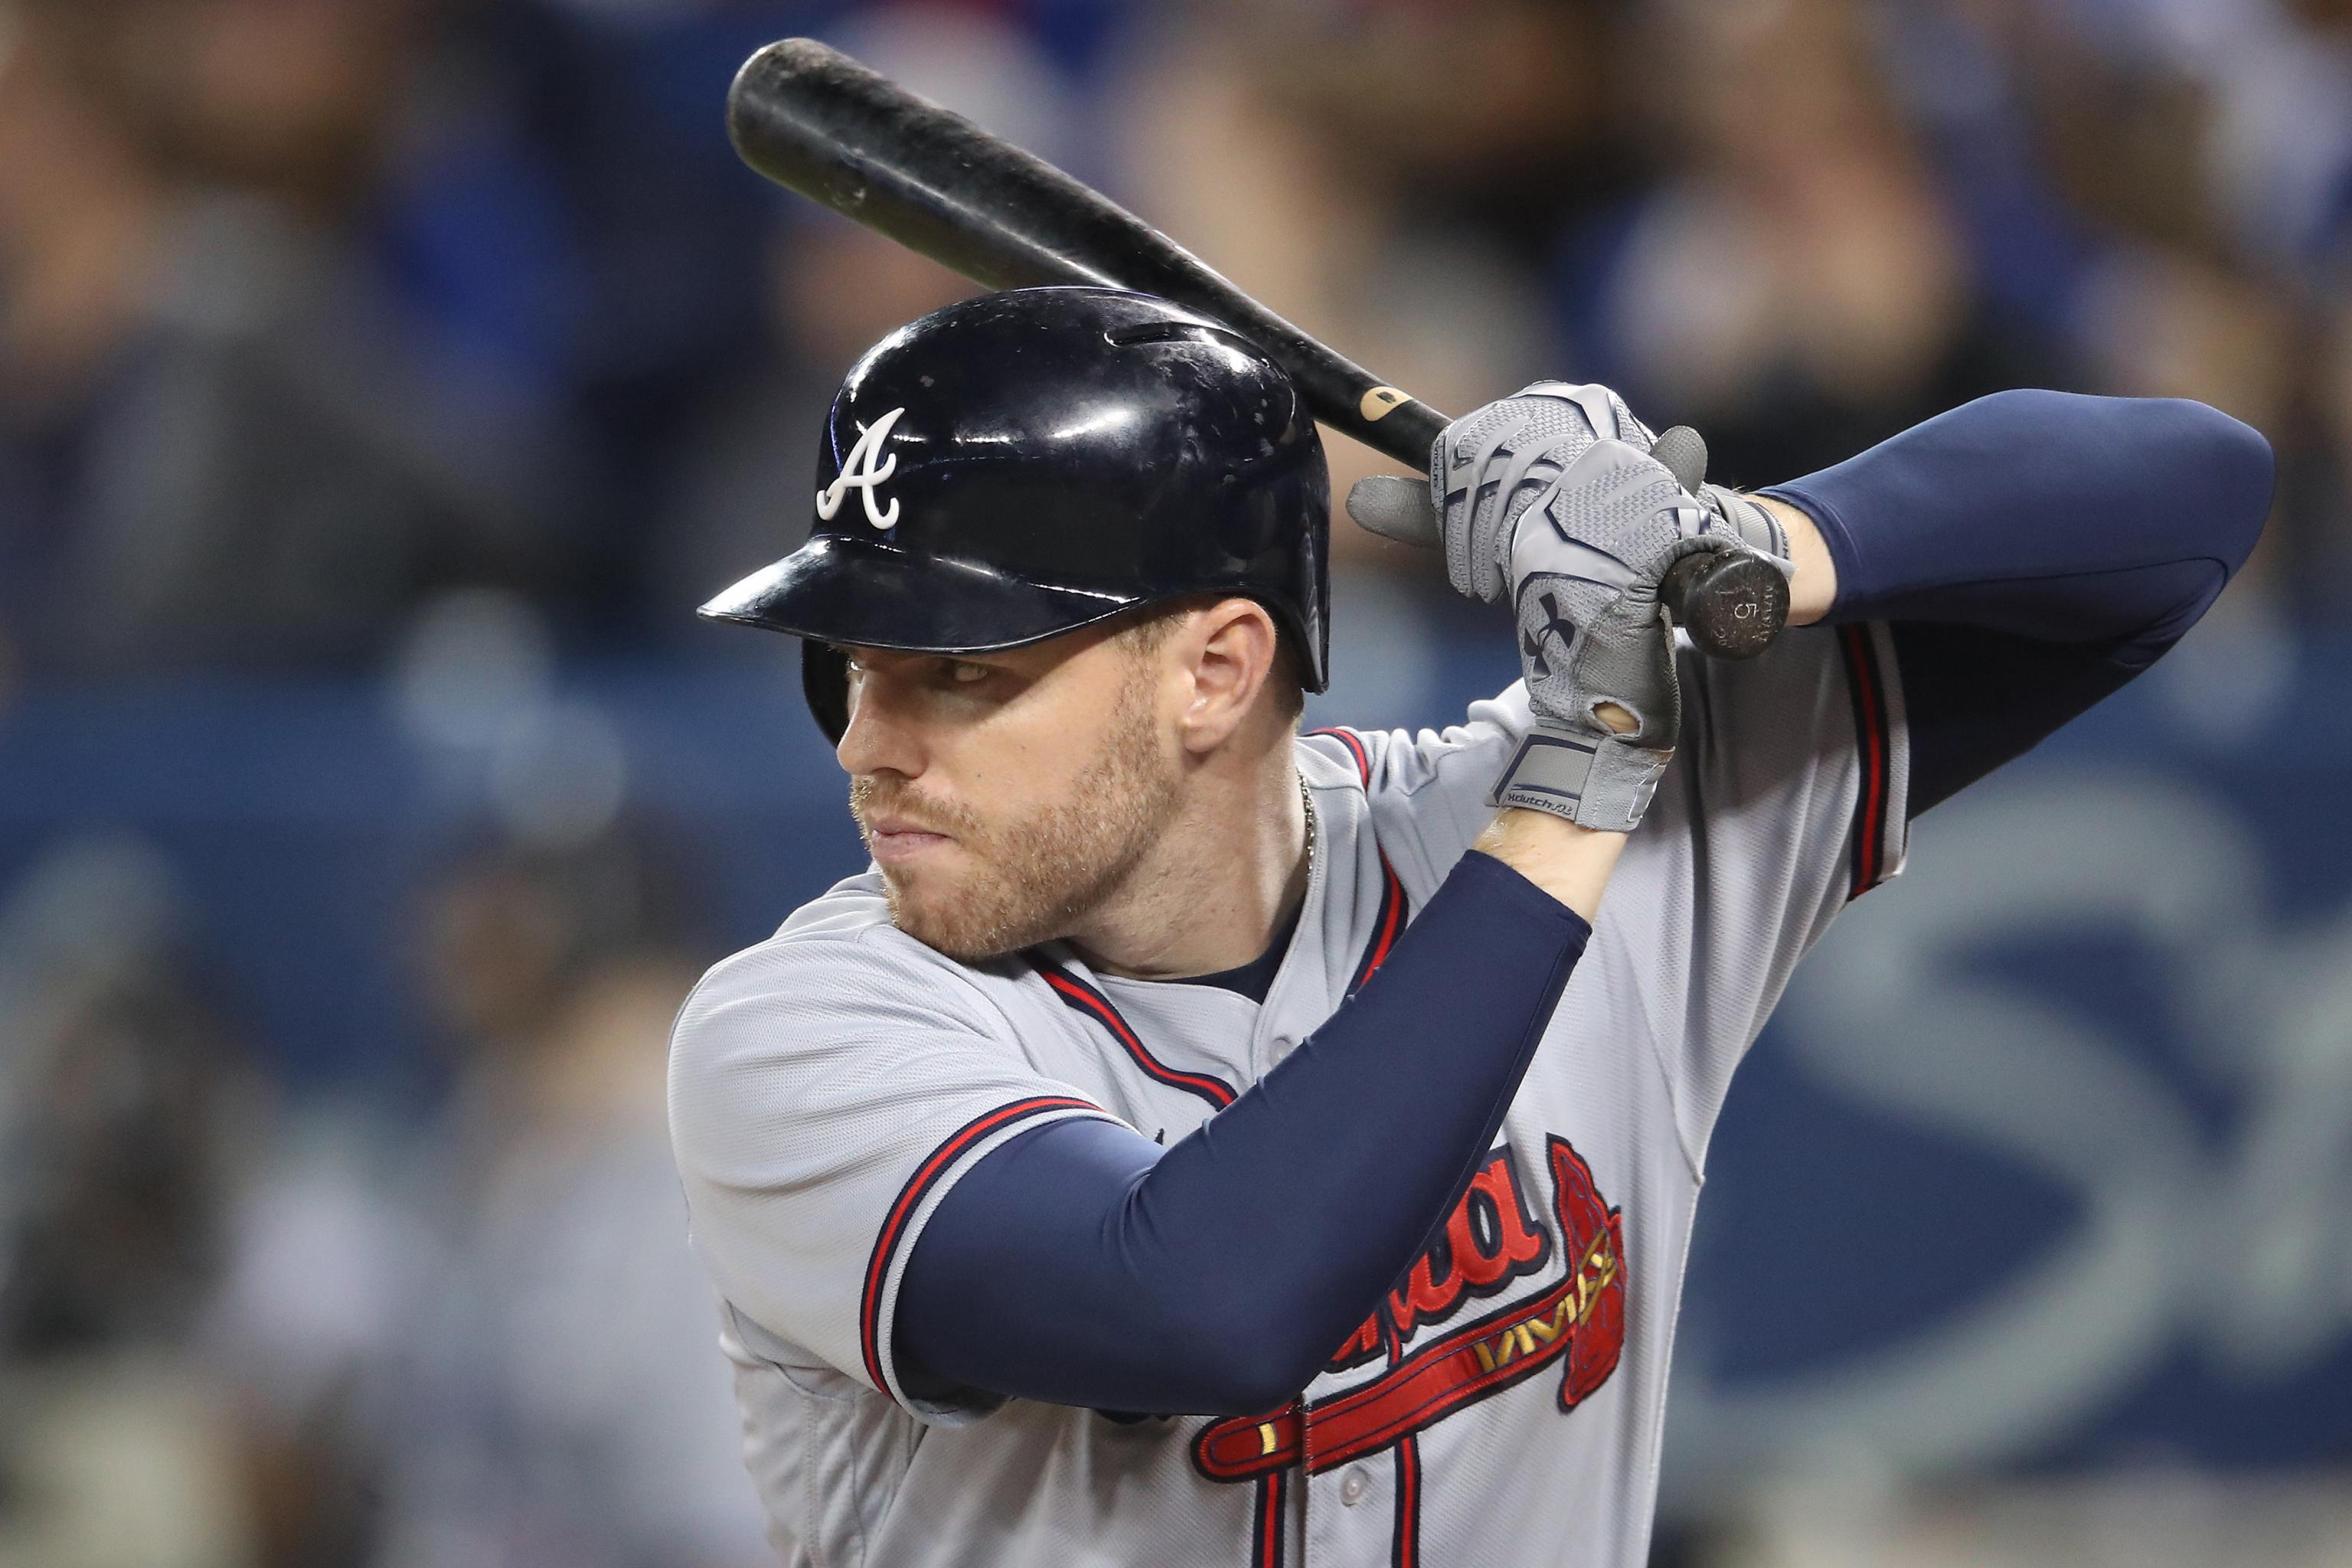 Freddie Freeman homers and gets 4 hits on his birthday, leading